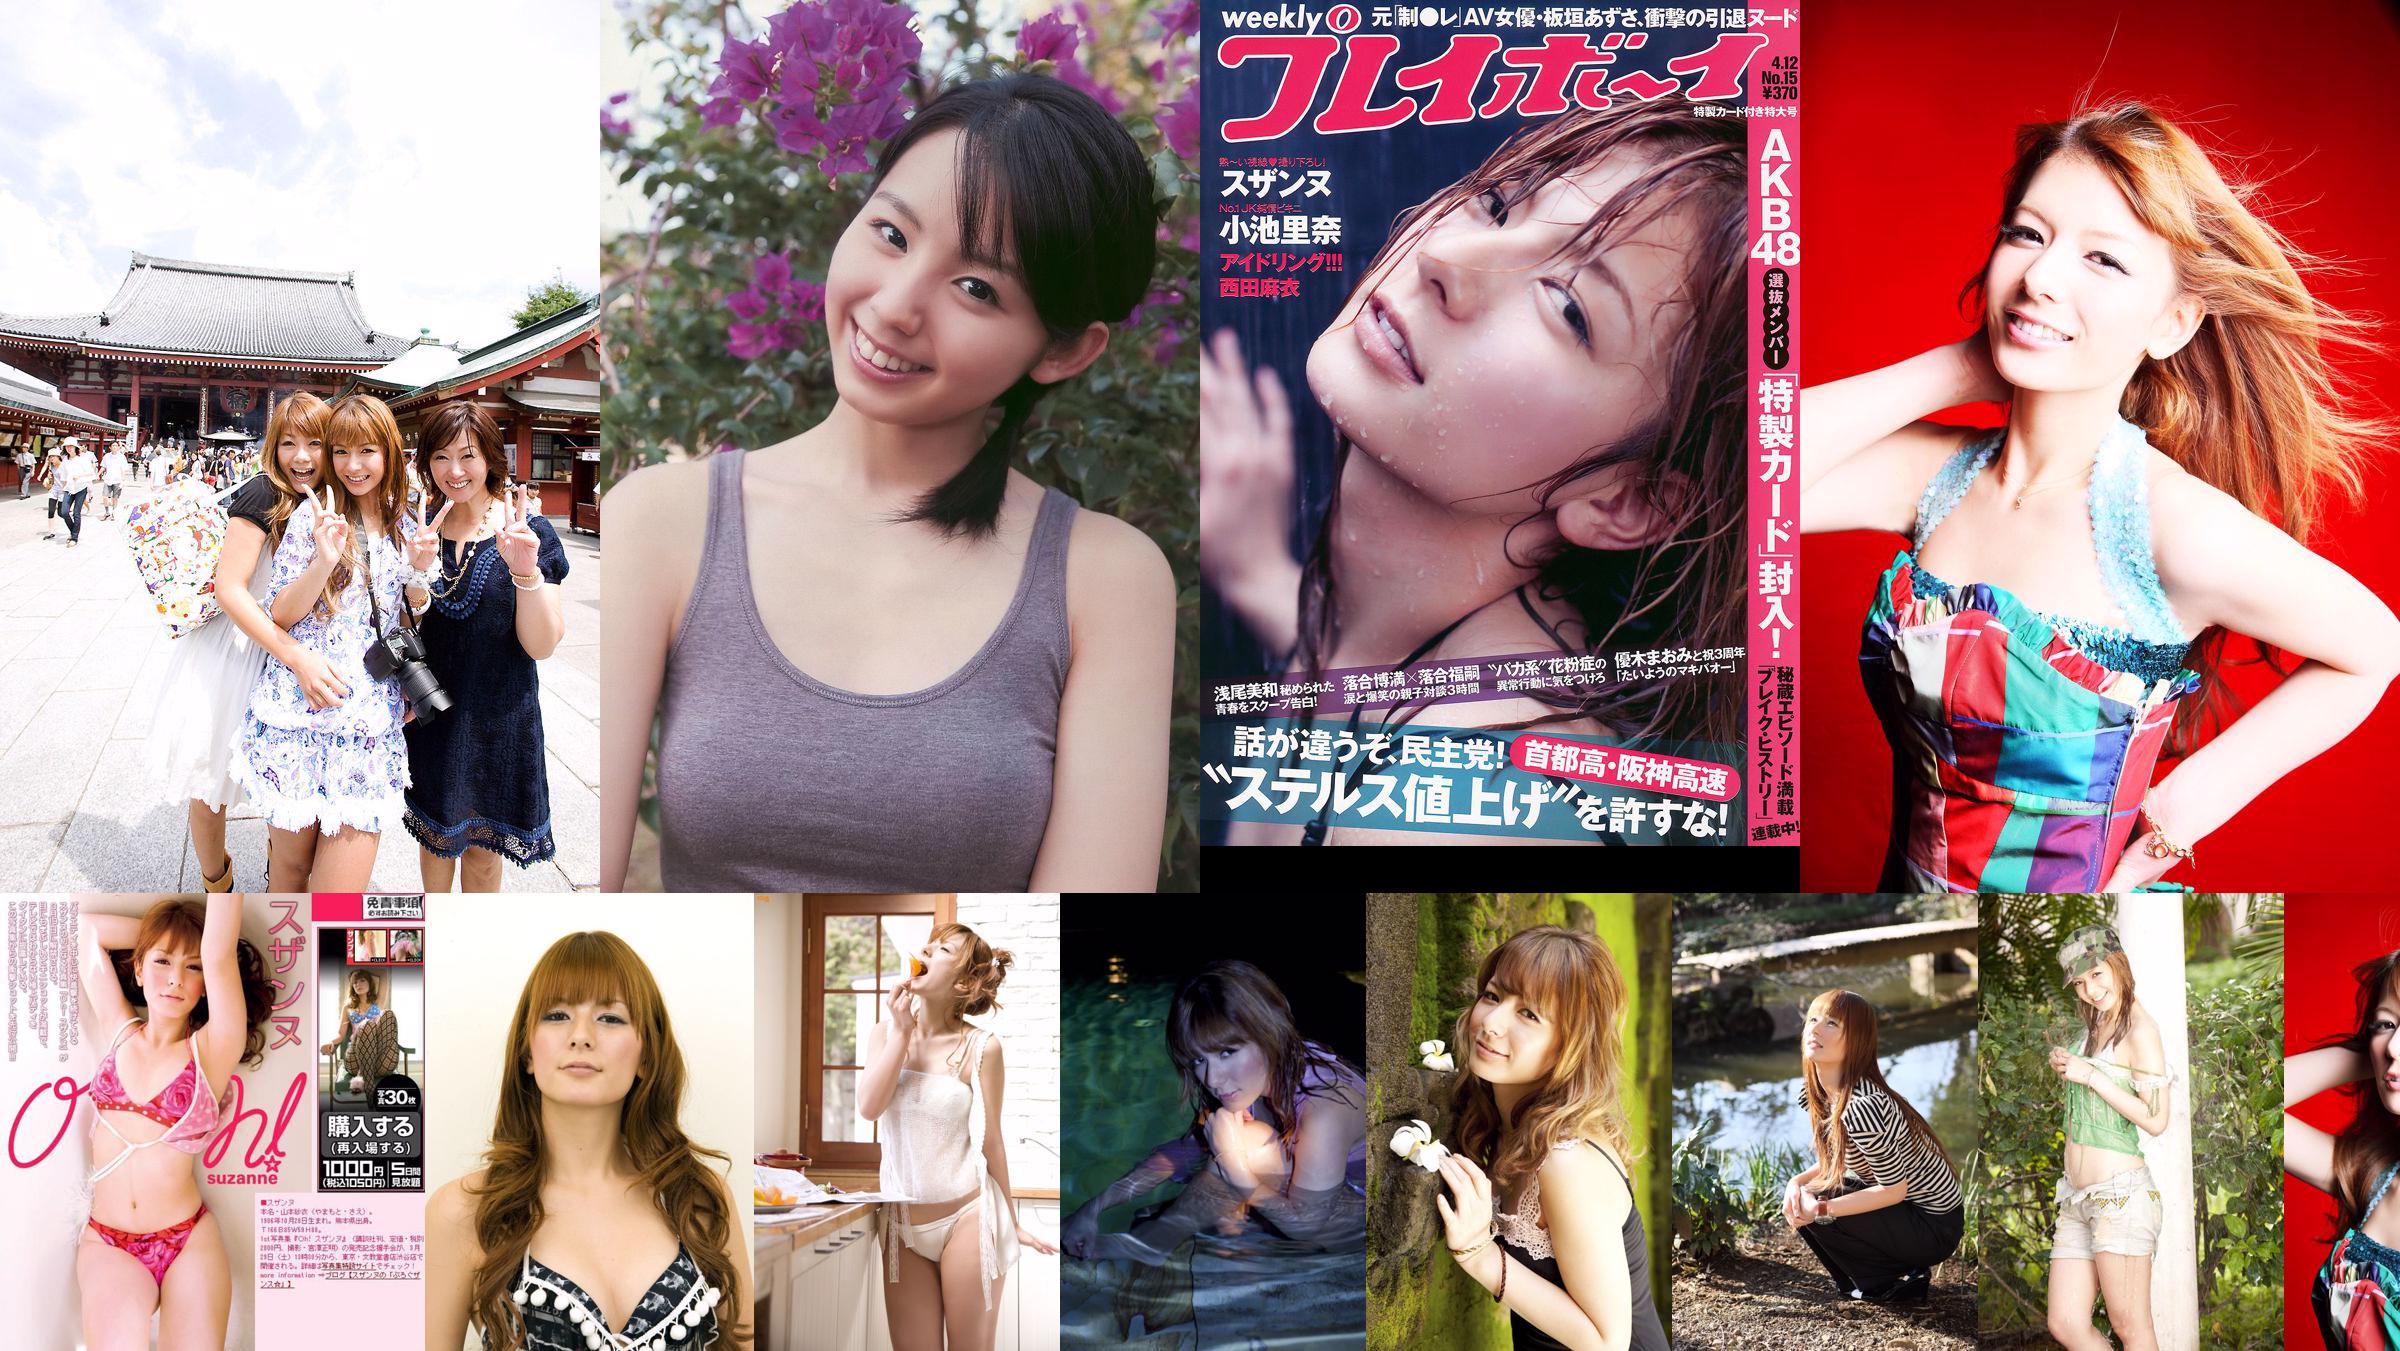 Yamamoto Sayi/スザンヌ "Cant help fall in love" [Image.tv] No.8a09fd Page 2